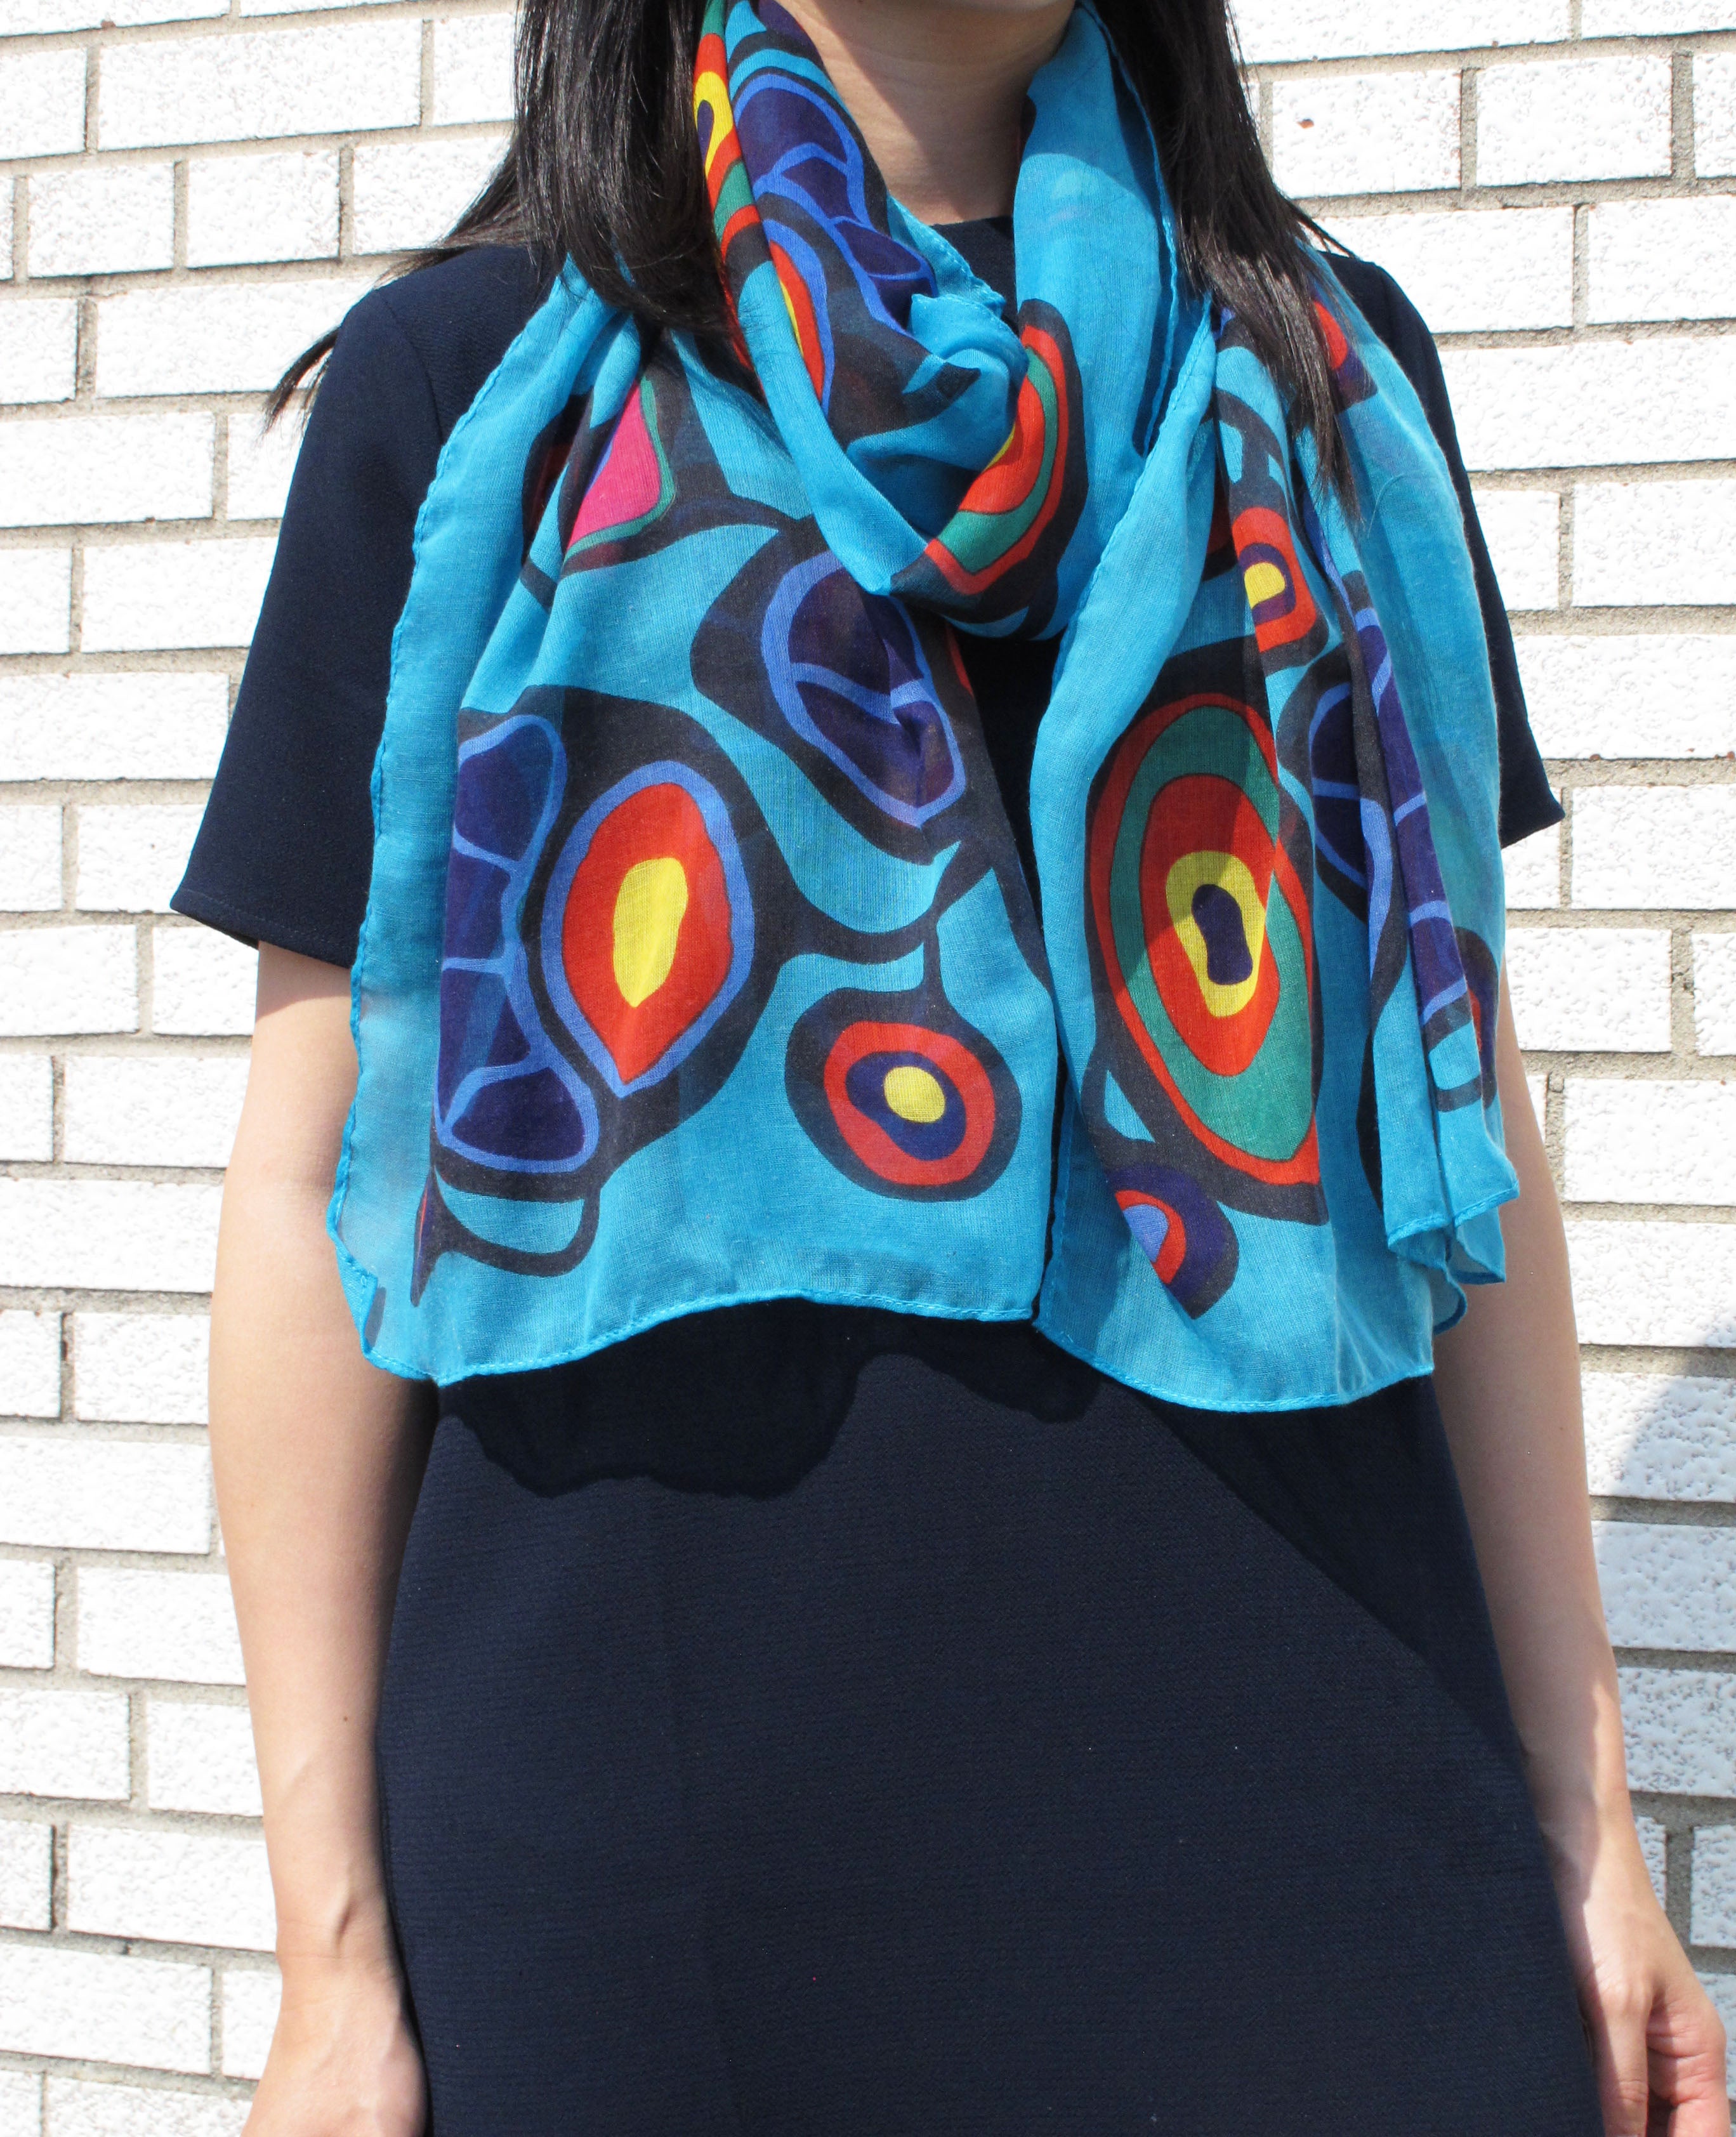 Norval Morisseau Flowers and Birds Artist Scarf